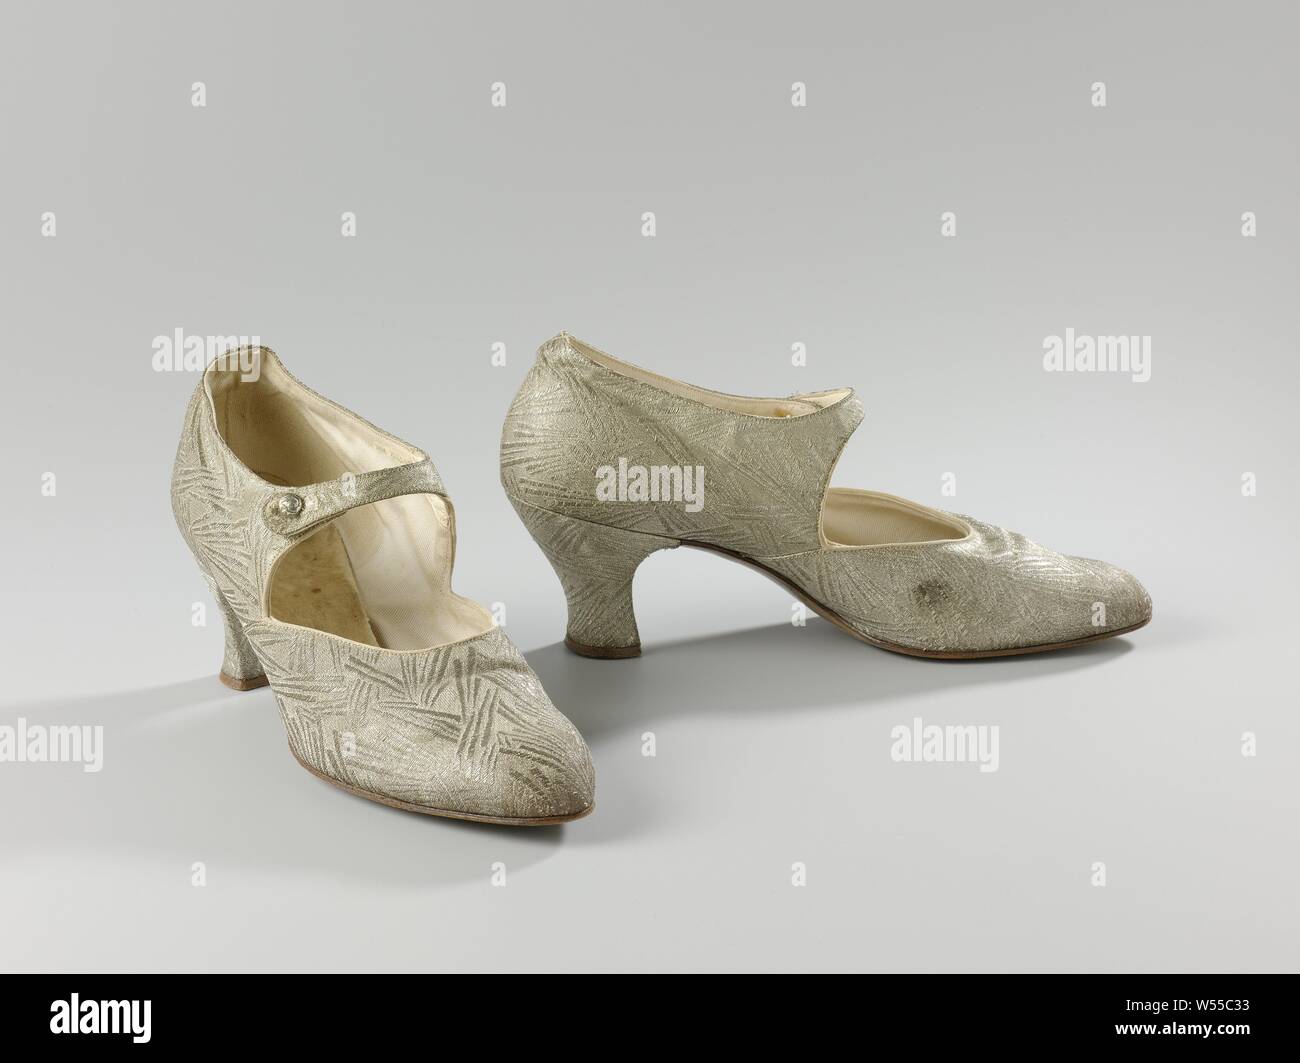 Ladies shoe made of silver brocade with ankle strap, Ladies shoe made of silver brocade with ankle strap. Model: The rounded pointed nose, one front sheet and two side sheets. The cut-out of the cover runs halfway down the geleng. The side sheets are perpendicular to the front sheet. An ankle strap is attached to the right-hand side sheet. A silver-colored button is attached to the left-hand side panel through a metal eye. The front of the heel runs straight down at a rounded corner. The side and back of the narrow heel are fitted and covered with silver brocade. The heel has a brown leather Stock Photo